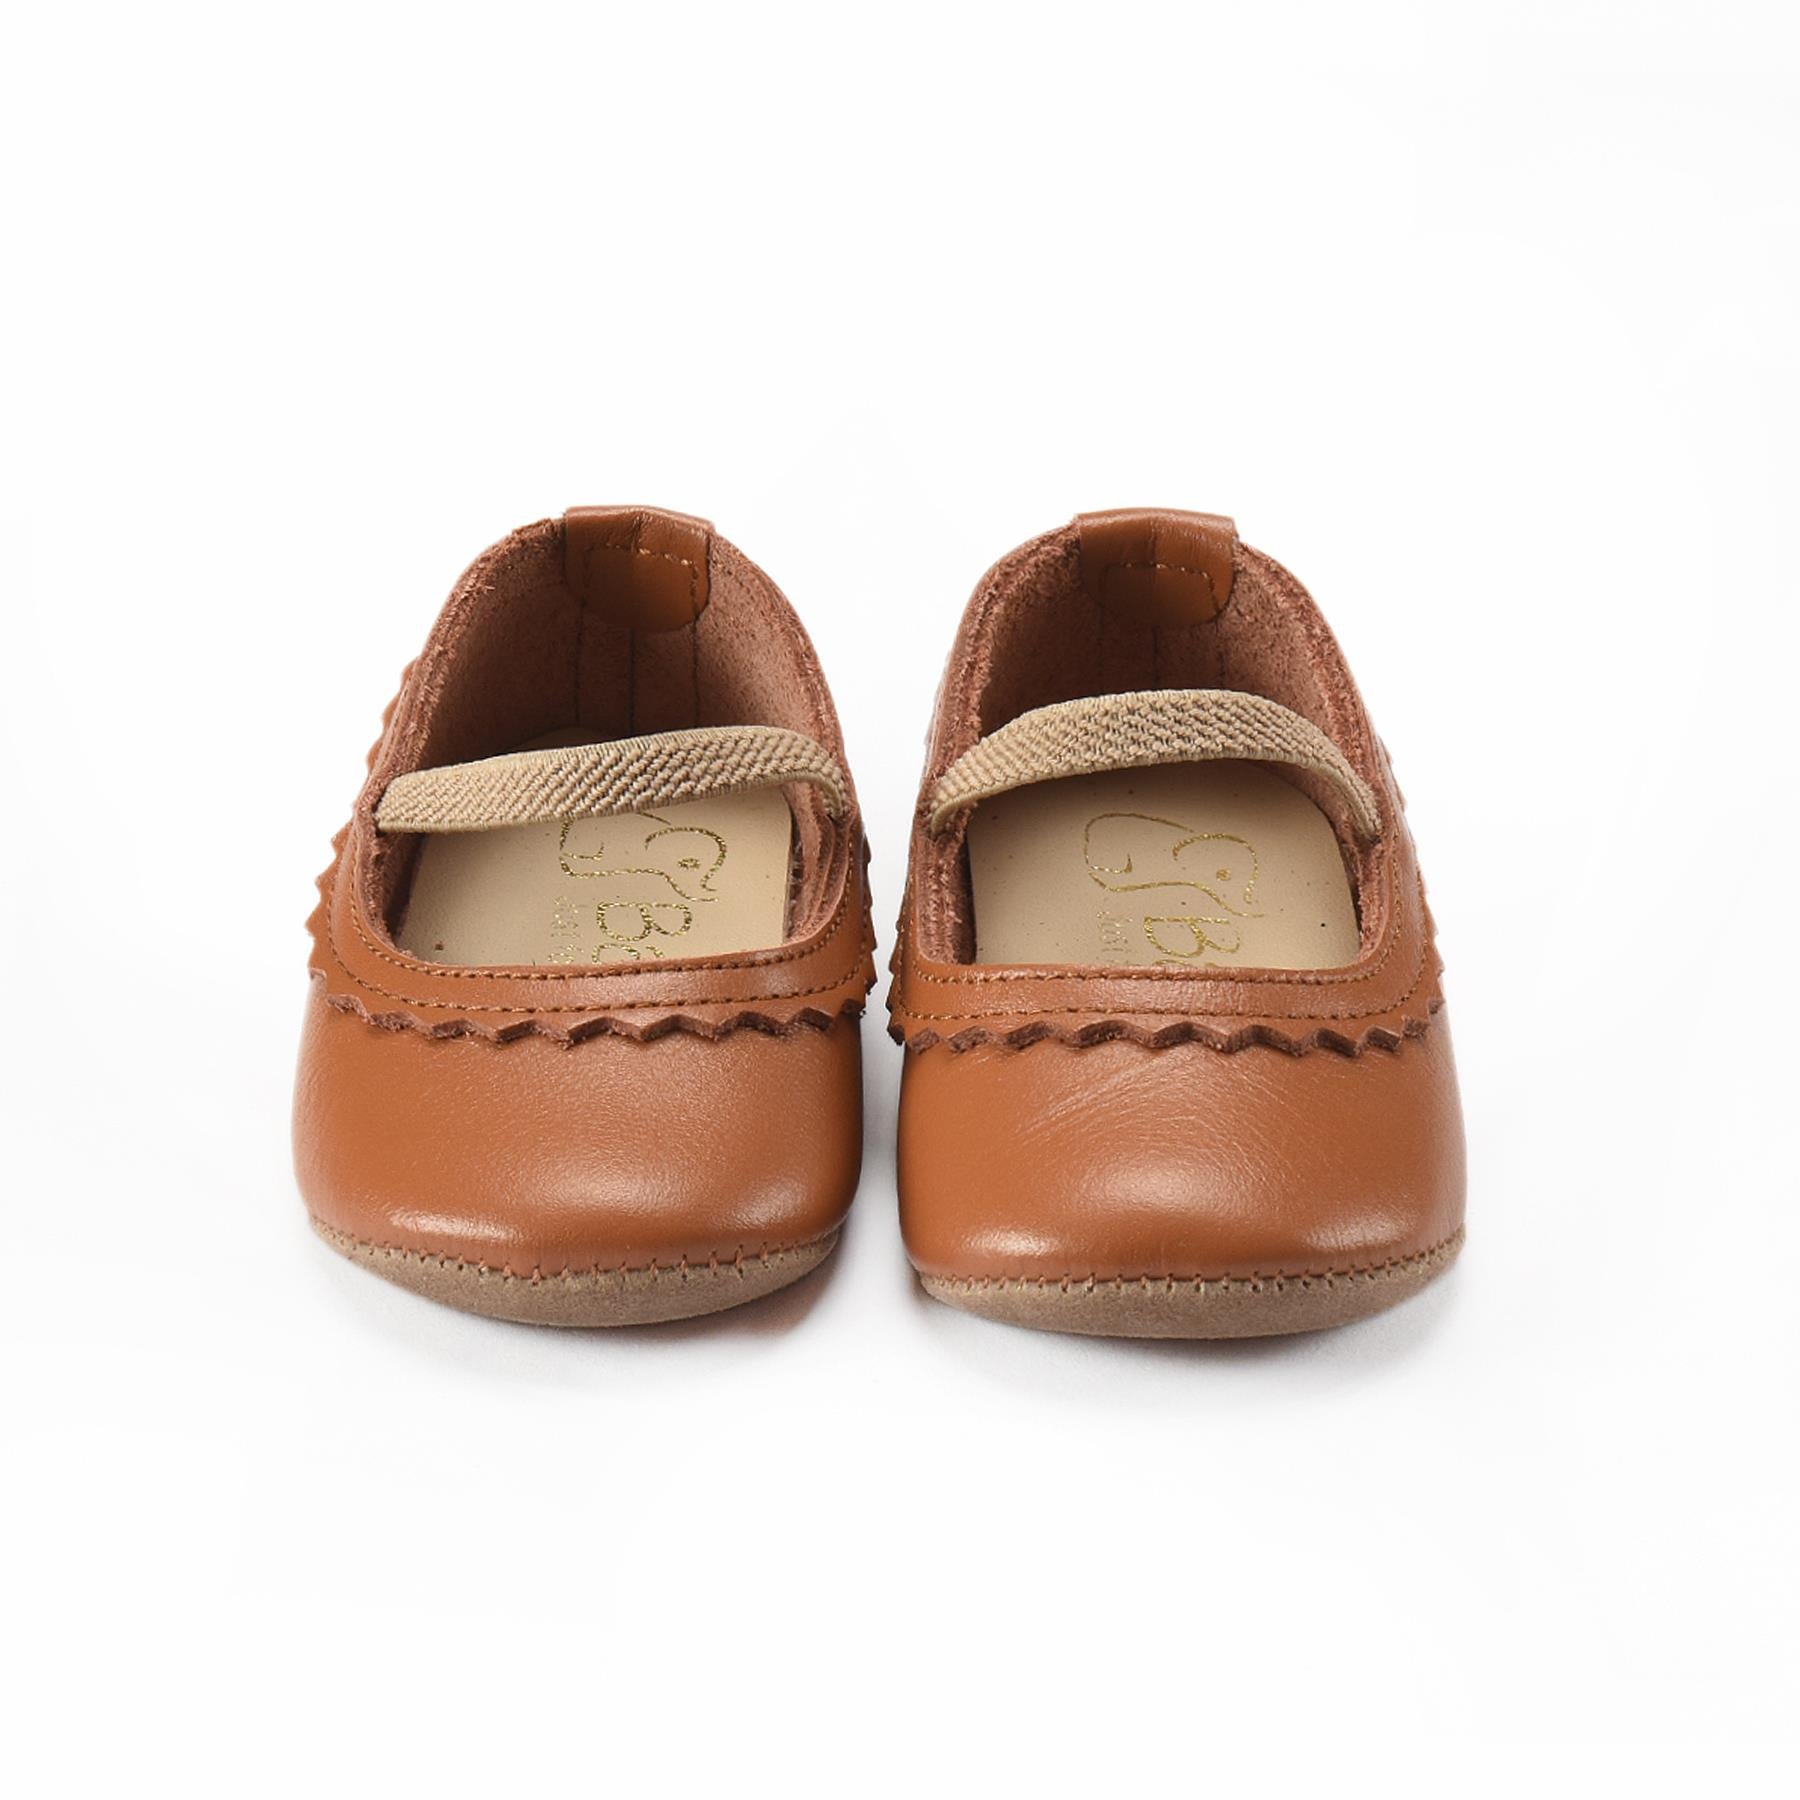 Leather Baby Booties Brown